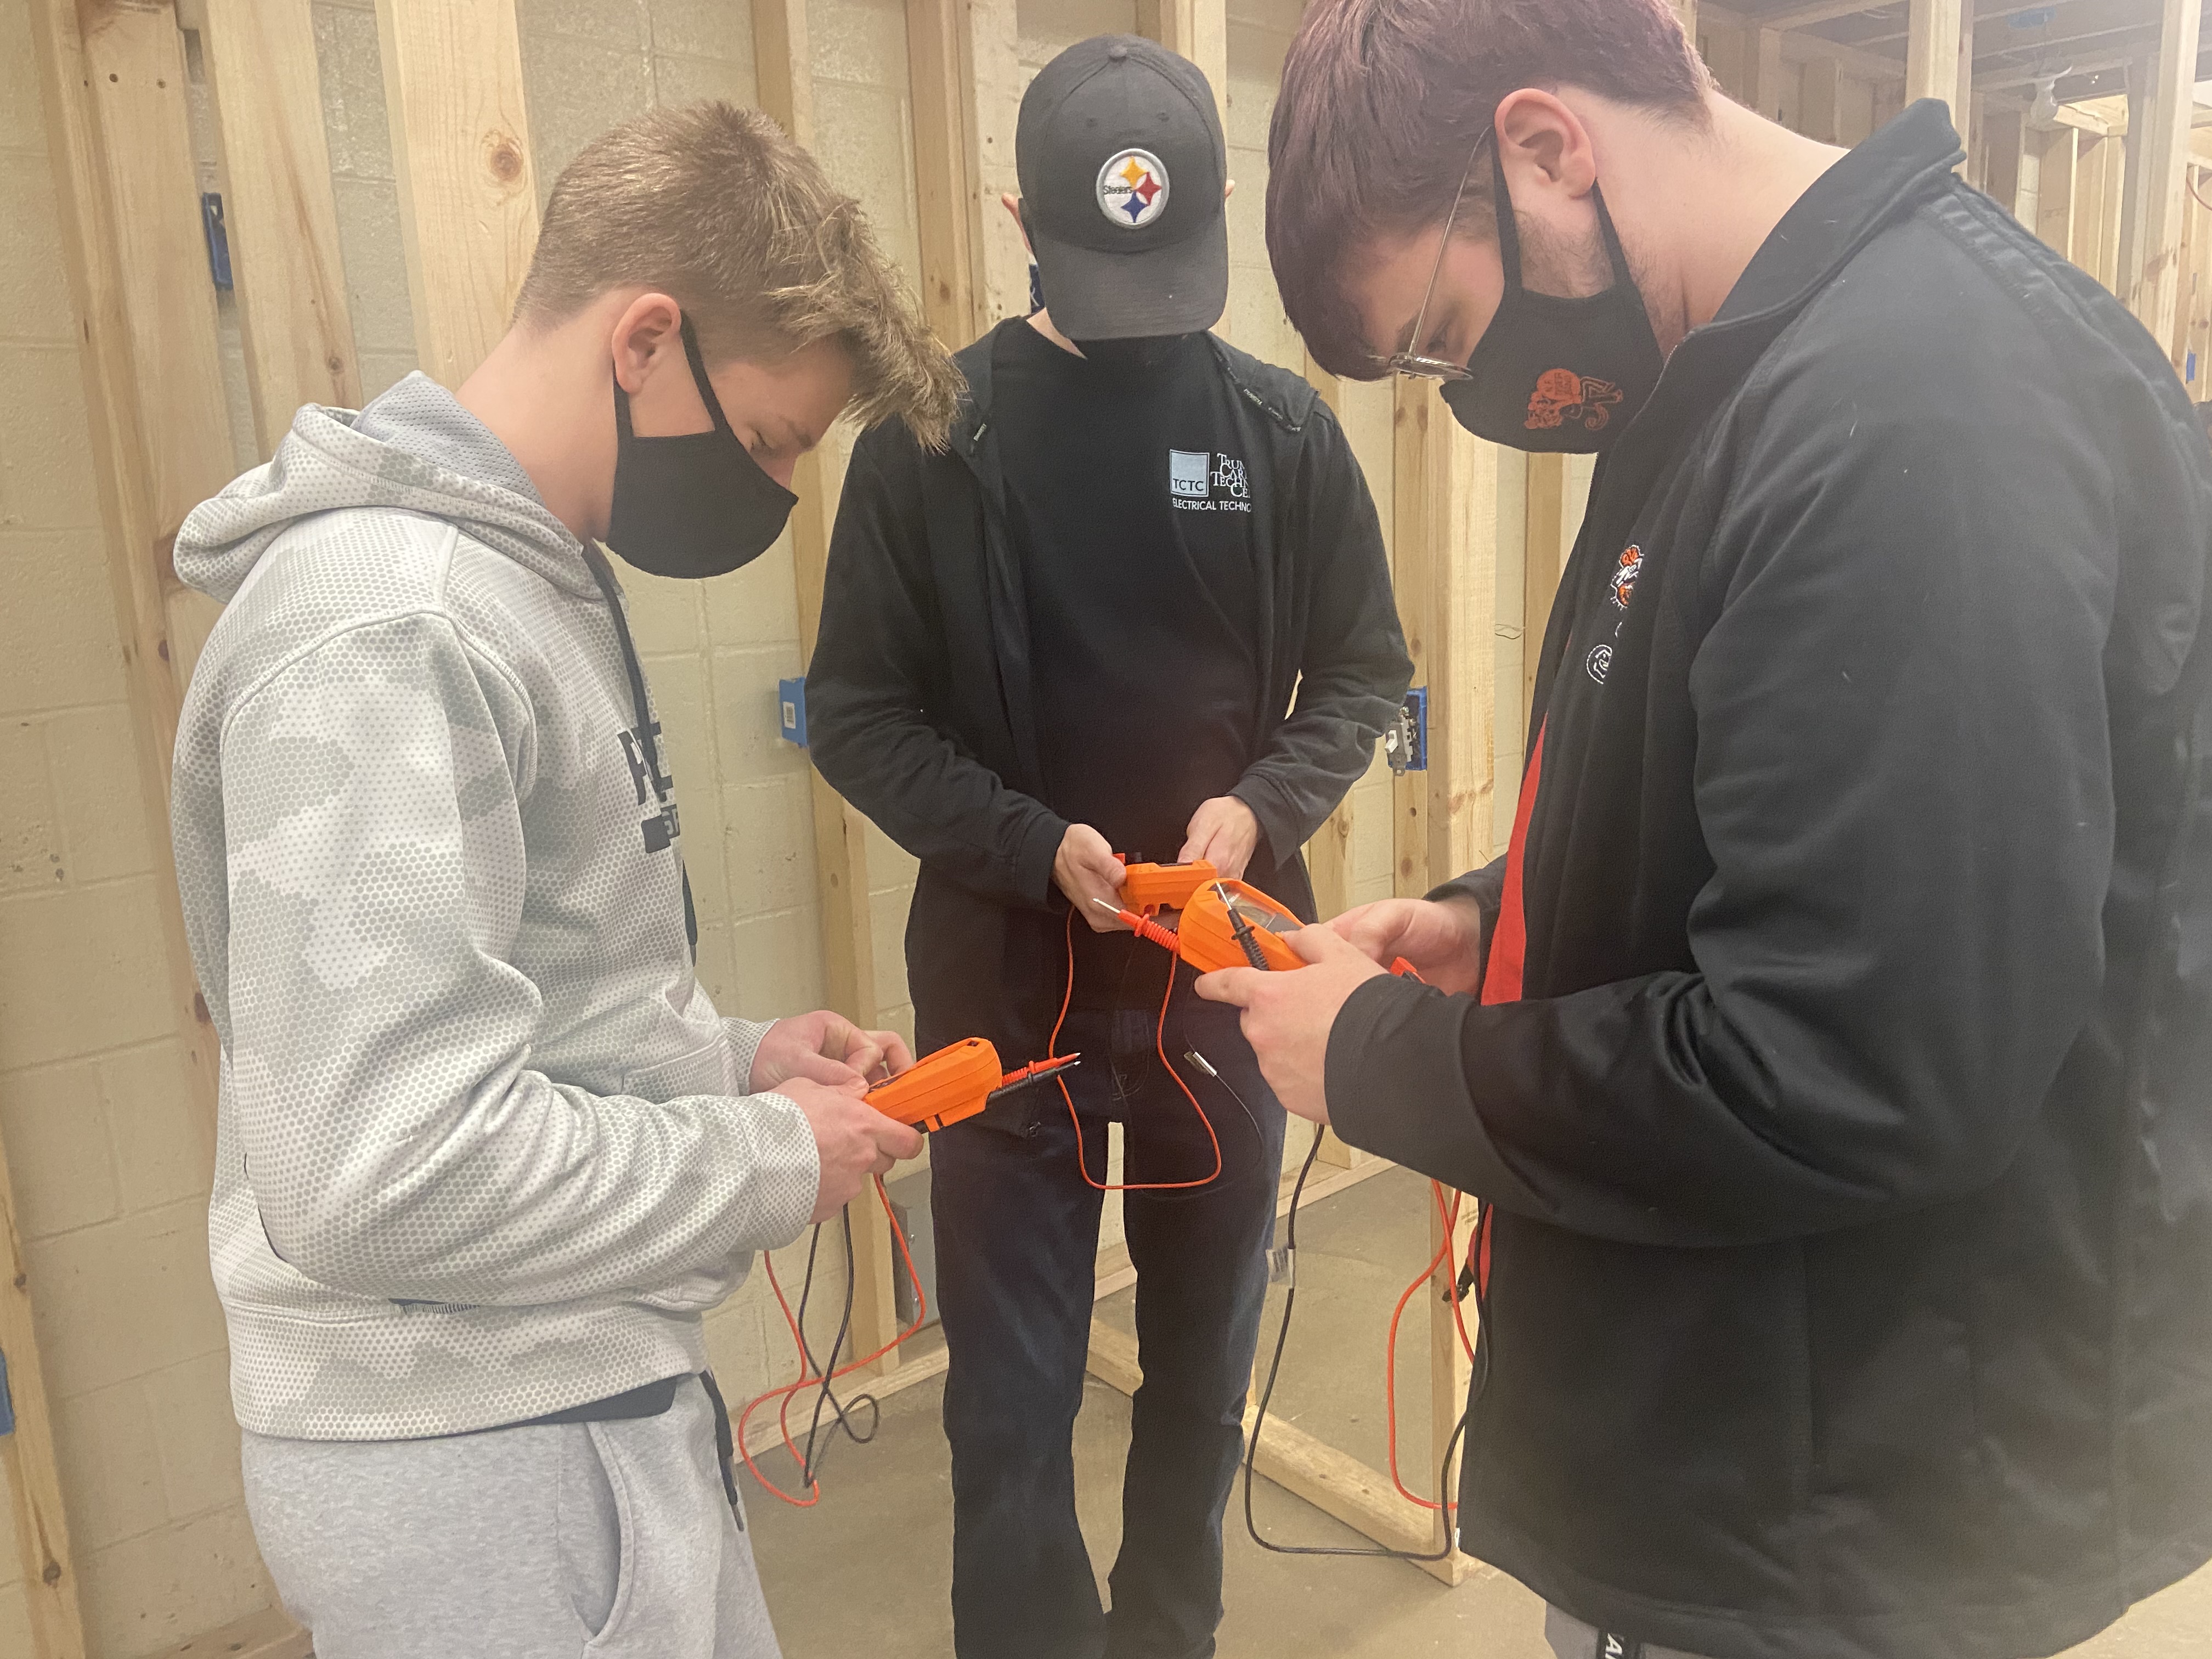 Students working in electrical